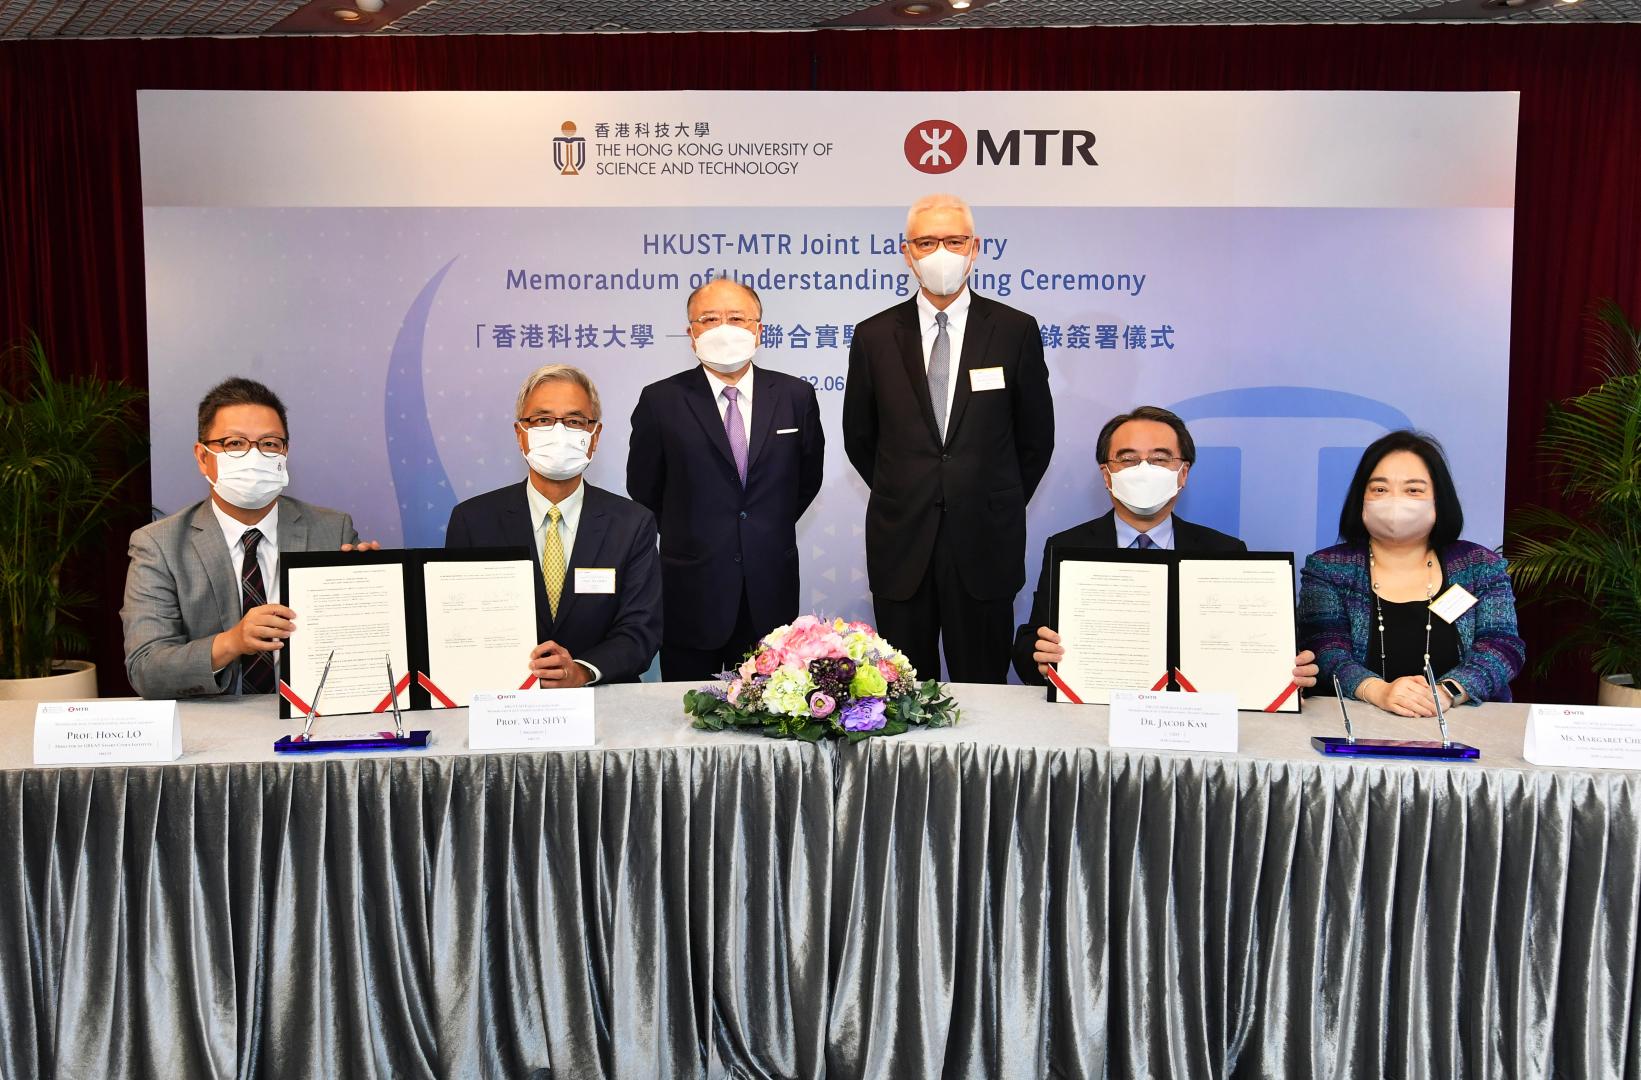 Witnessed by Dr Rex Auyeung, Chairman of MTR Corporation (3rd from right) and Mr Andrew Liao, Council Chairman of HKUST (3rd from left), Dr Jacob Kam, Chief Executive Officer of MTR Corporation (2nd from right), Ms Margaret Cheng, Acting President of MTR Academy (1st from right), Professor Wei Shyy, President of HKUST (2nd from left) and Professor Lo Hong-Kam, Director of GREAT Smart Cities Institute of HKUST (1st from left) signed the MoU on 10 June 2022.